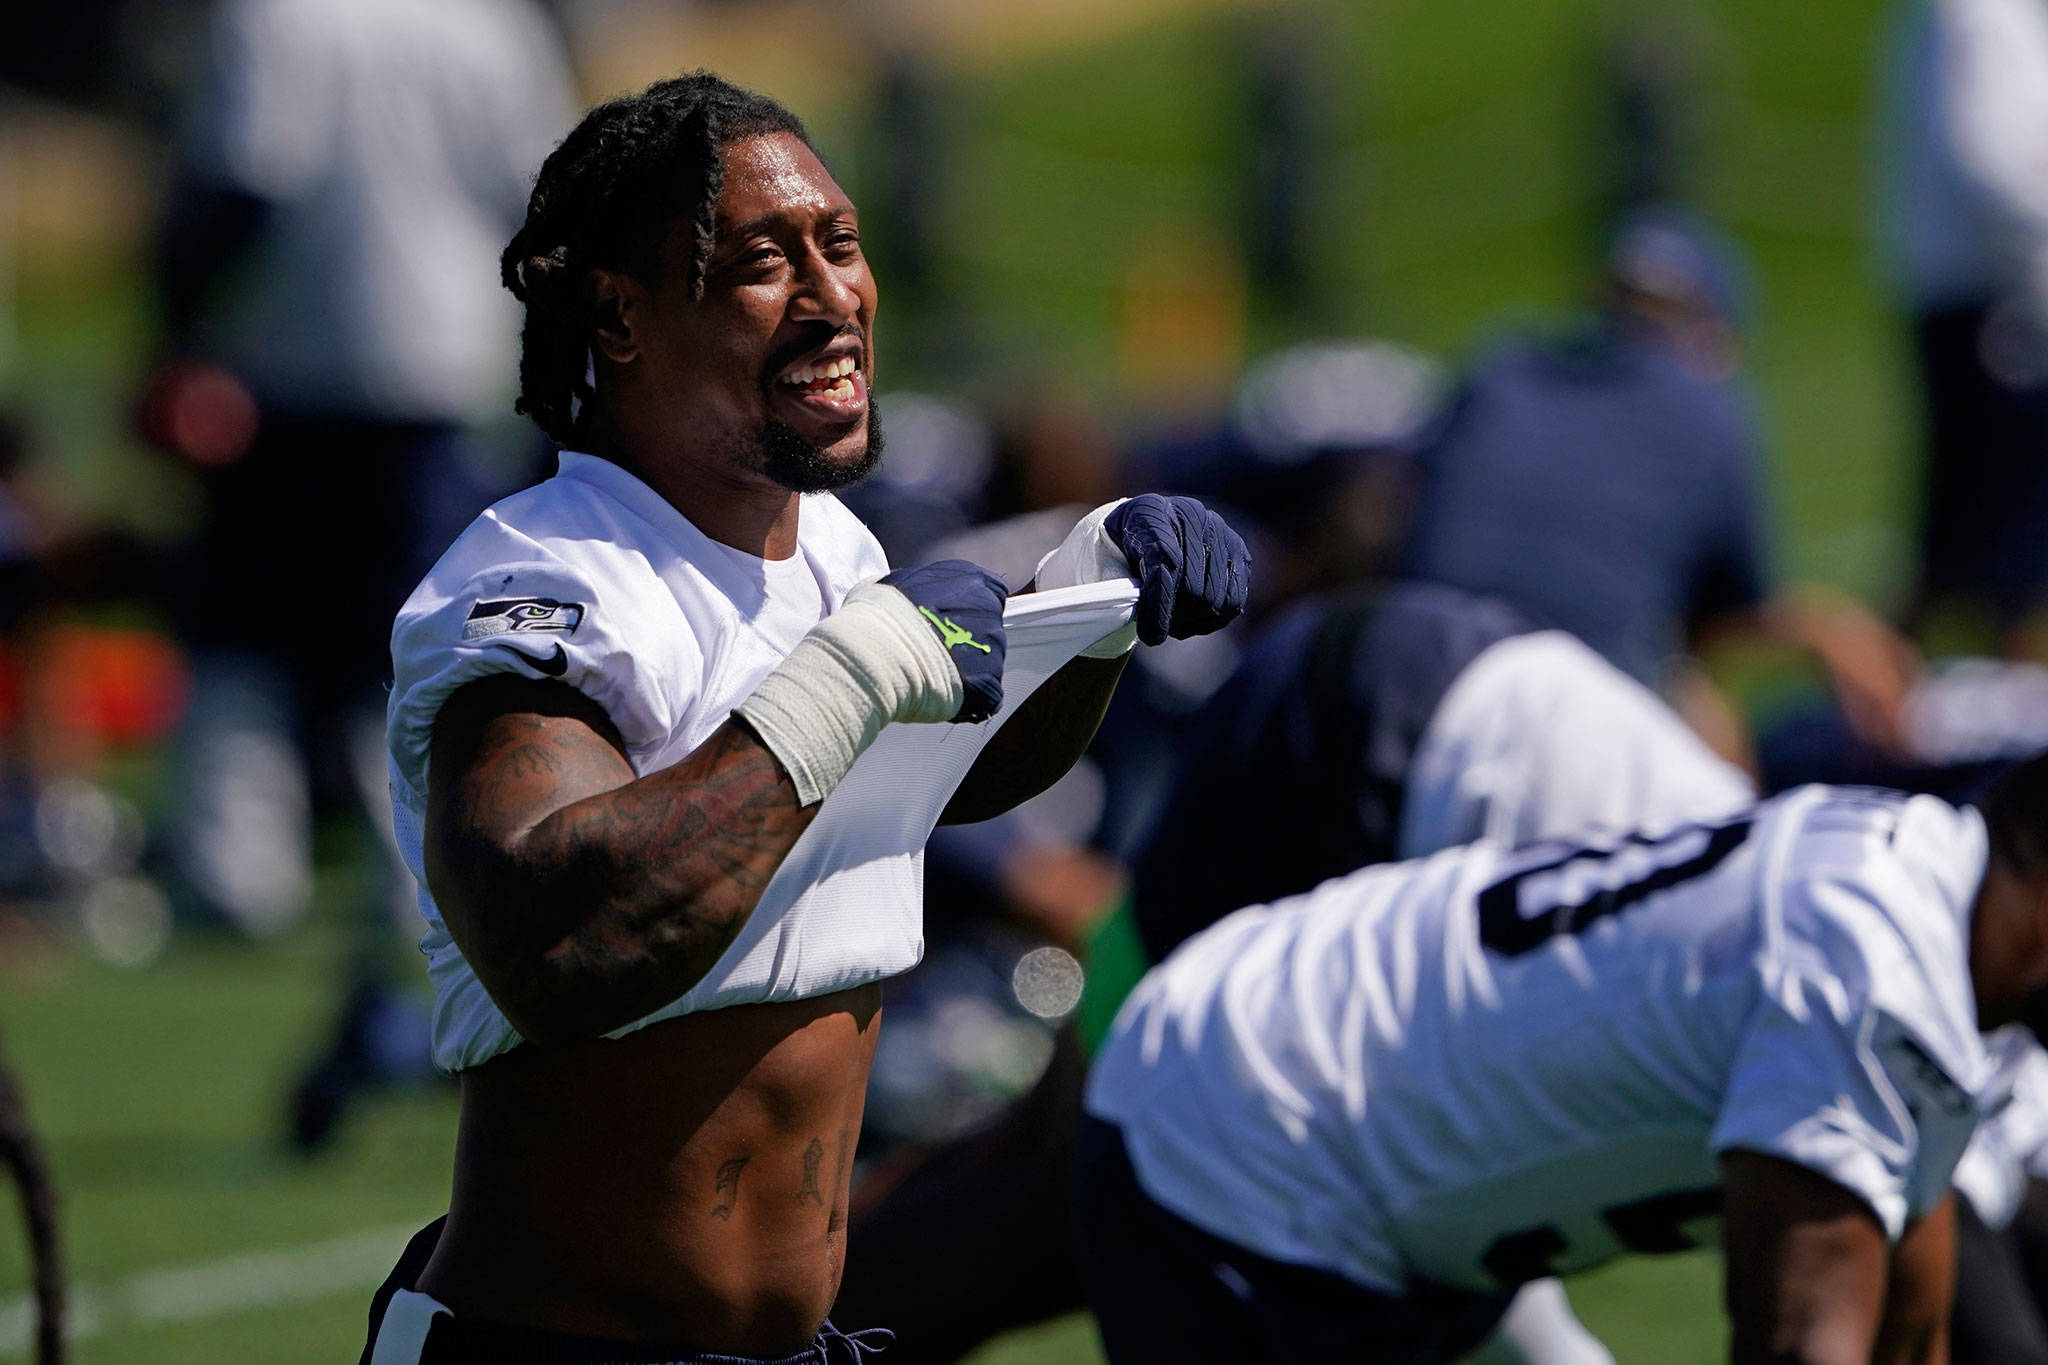 Seahawks linebacker Bruce Irvin stretches before practice on Aug. 24, 2020, at the Virginia Mason Athletic Center in Renton. (AP Photo/Ted S. Warren)